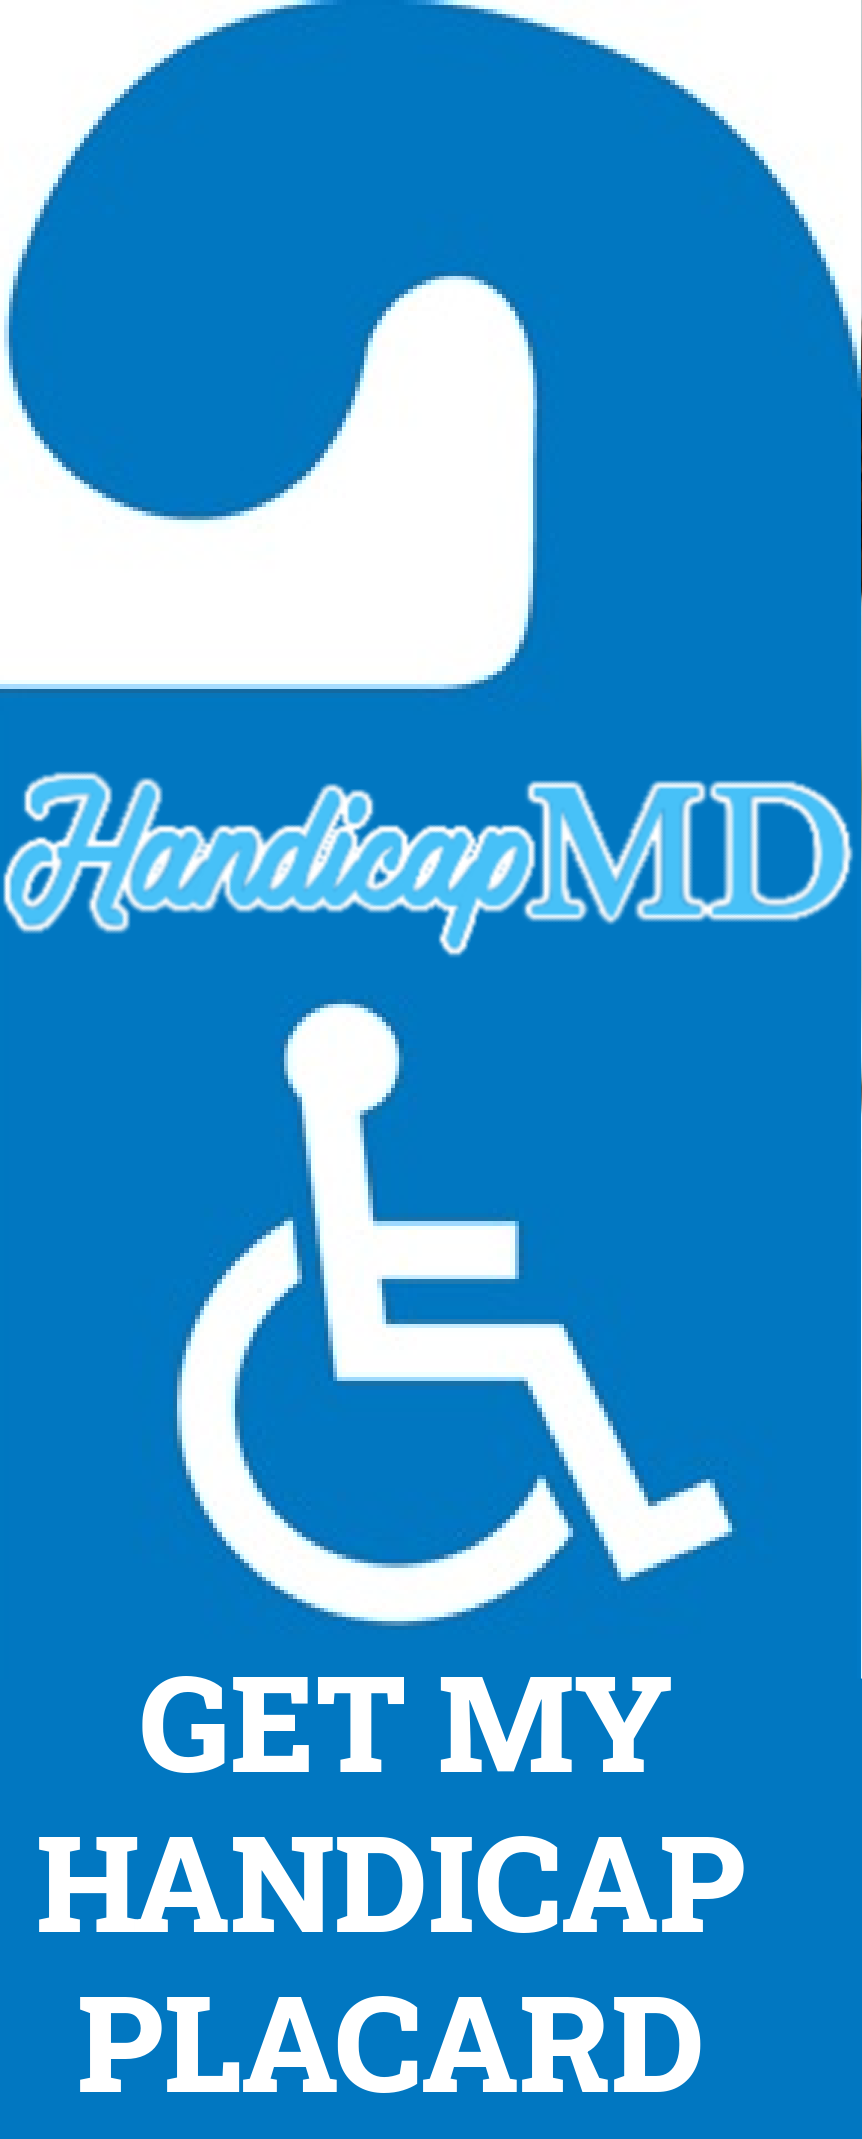 The Impact of Handicap Placard Abuse and How to Report it in Arizona